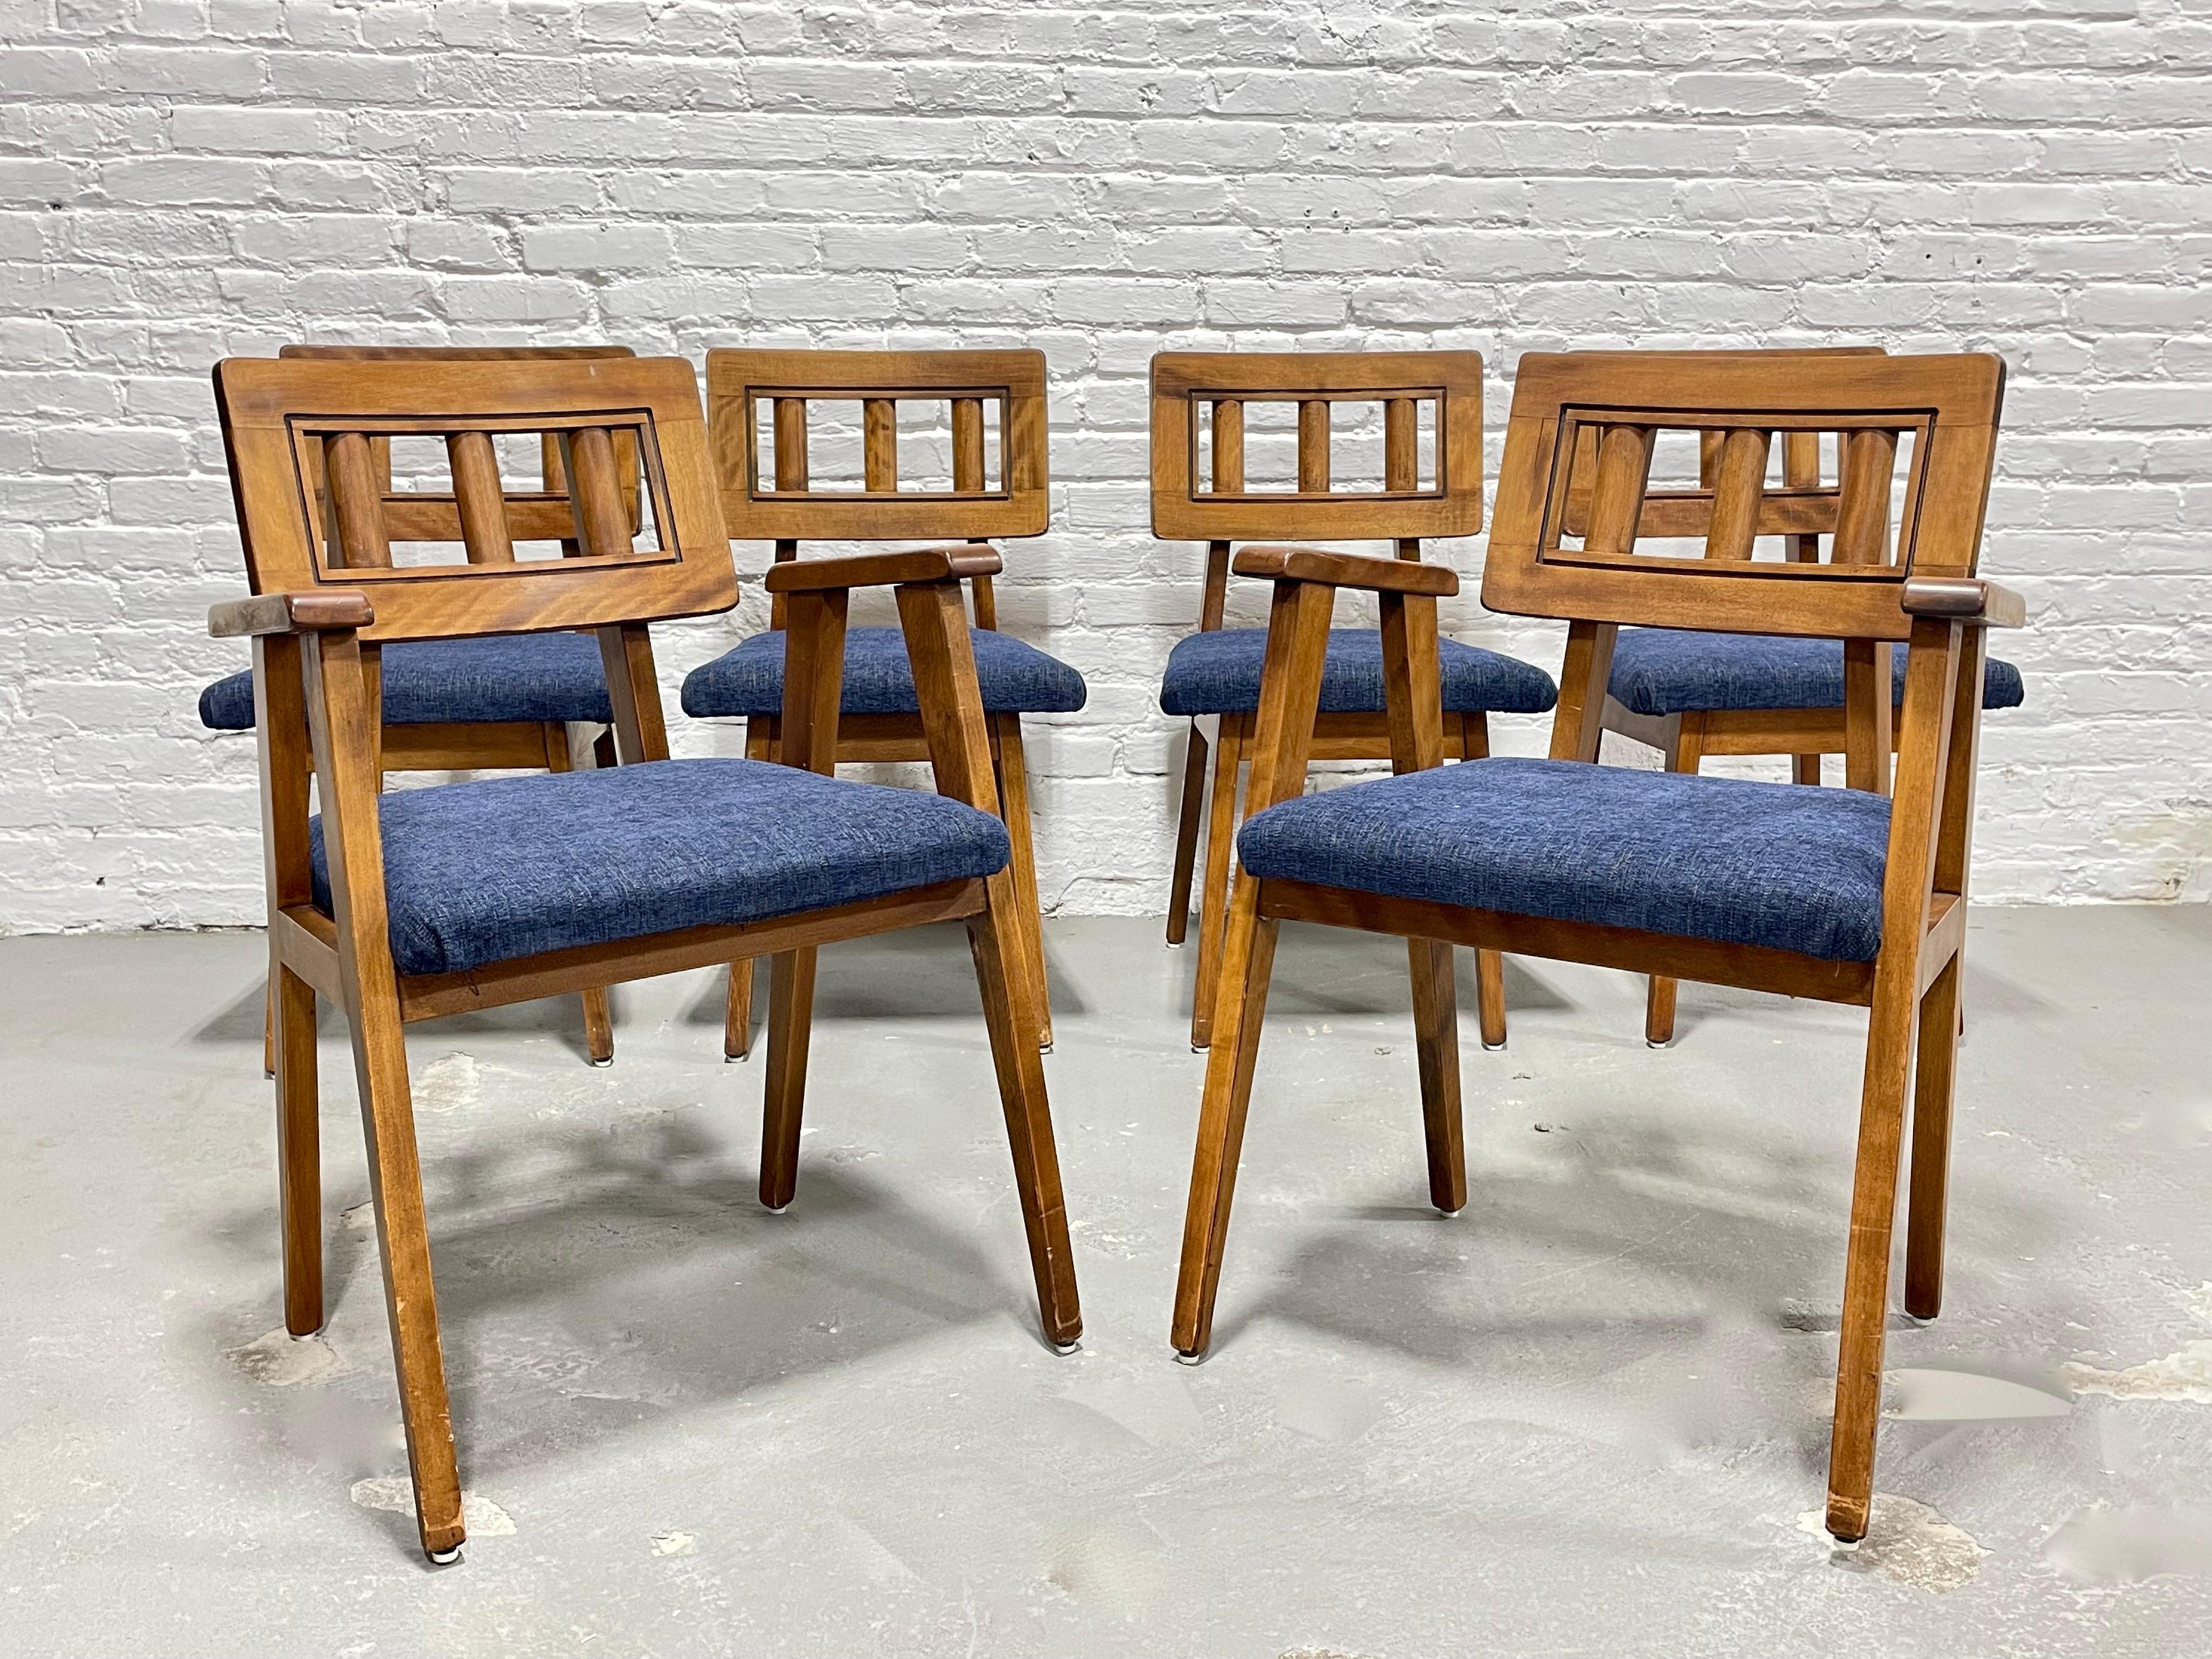 Set of six rare Mid-Century Modern walnut dining chairs featuring new denim upholstery. The square spindled back supports are so sweet and the denim colored upholstery contrasts beautifully with the walnut frames. Seats are plush and comfy and the